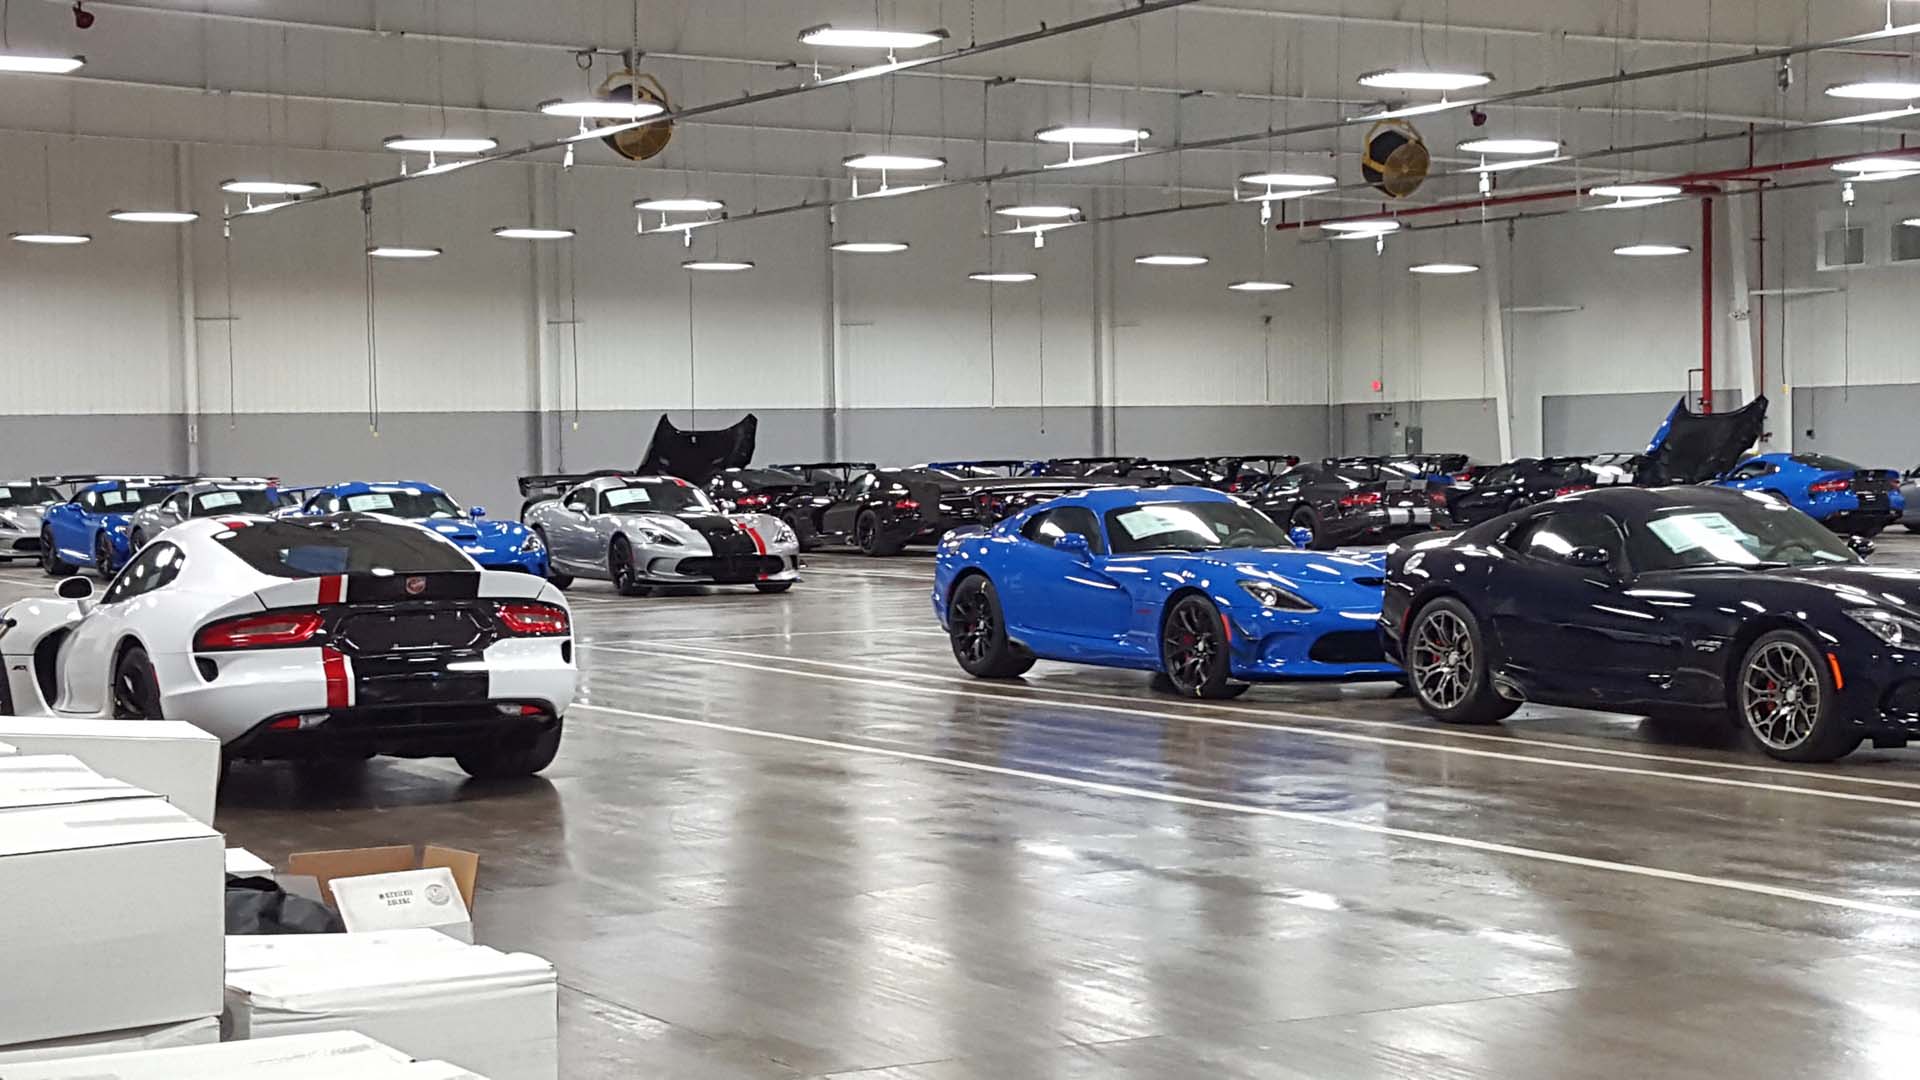 This room contains completed Dodge Vipers, which are ready to be sent to their happy owners around the globe. Each one is different, custom built, and exclusive. With a special custom-ordering process, Dodge won’t sell a Viper with the same colour scheme as yours for a full year after you order it, ensuring you’re driving a truly one-of-a-kind car. Special trucks pick the Vipers up from this climate-controlled storeroom when they’re ready for delivery. Owners can pick their new car up at the factory too, and meet its builders, if they like.